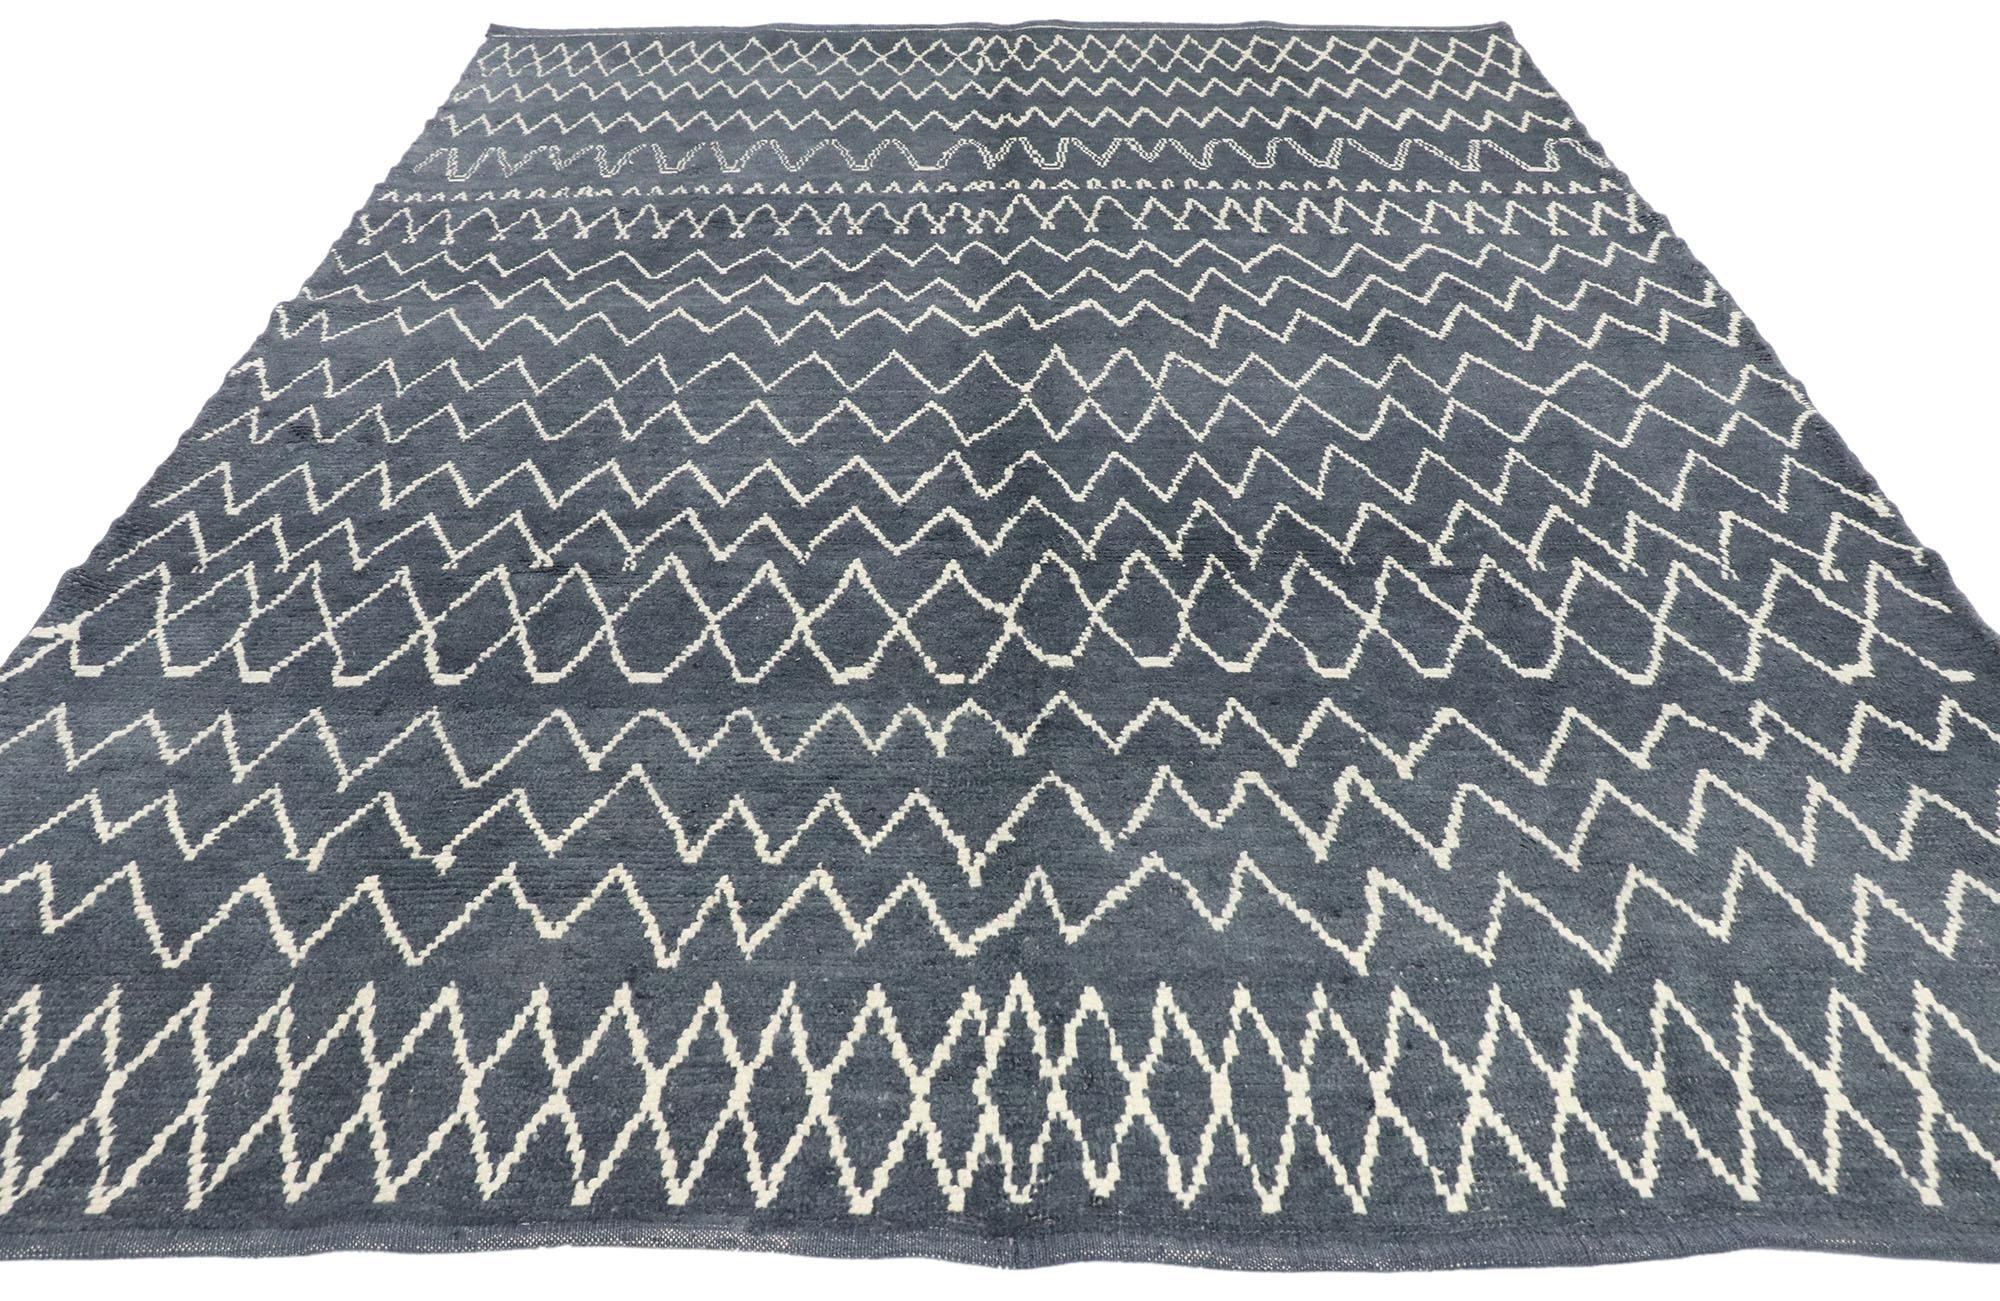 Tribal New Contemporary Moroccan Style Rug with Diamond Pattern and Chevron Design For Sale